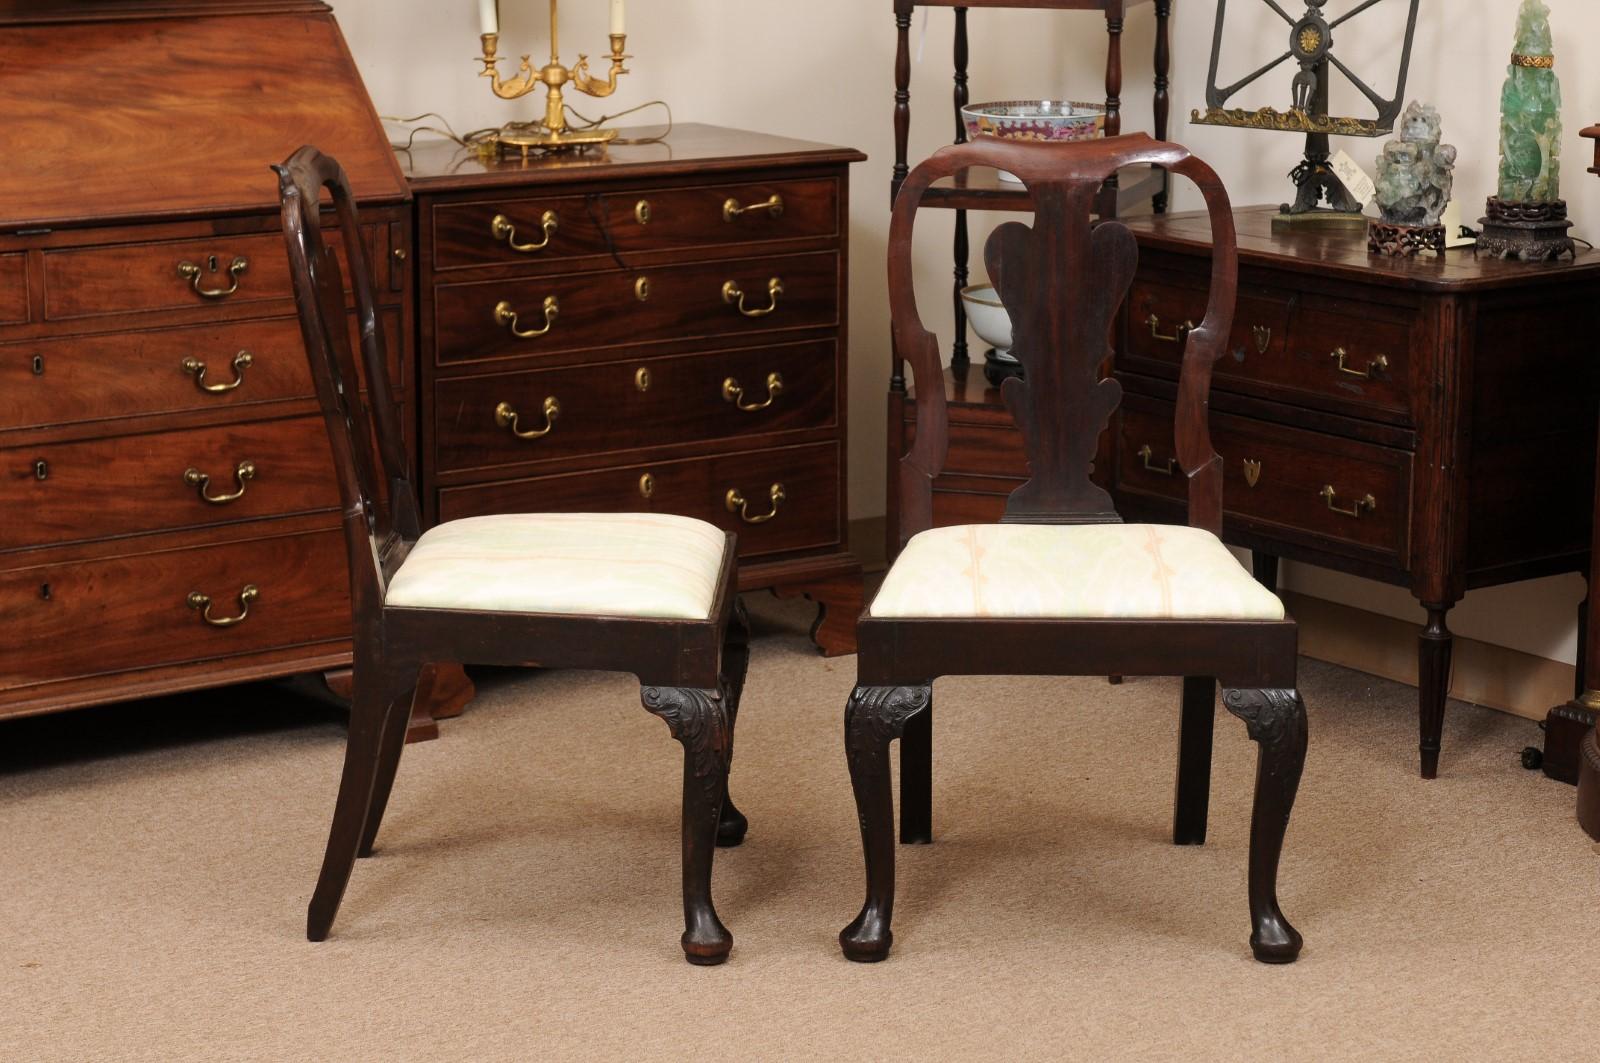 Pair of Queen Anne Walnut Side Chairs, 18th Century England For Sale 1